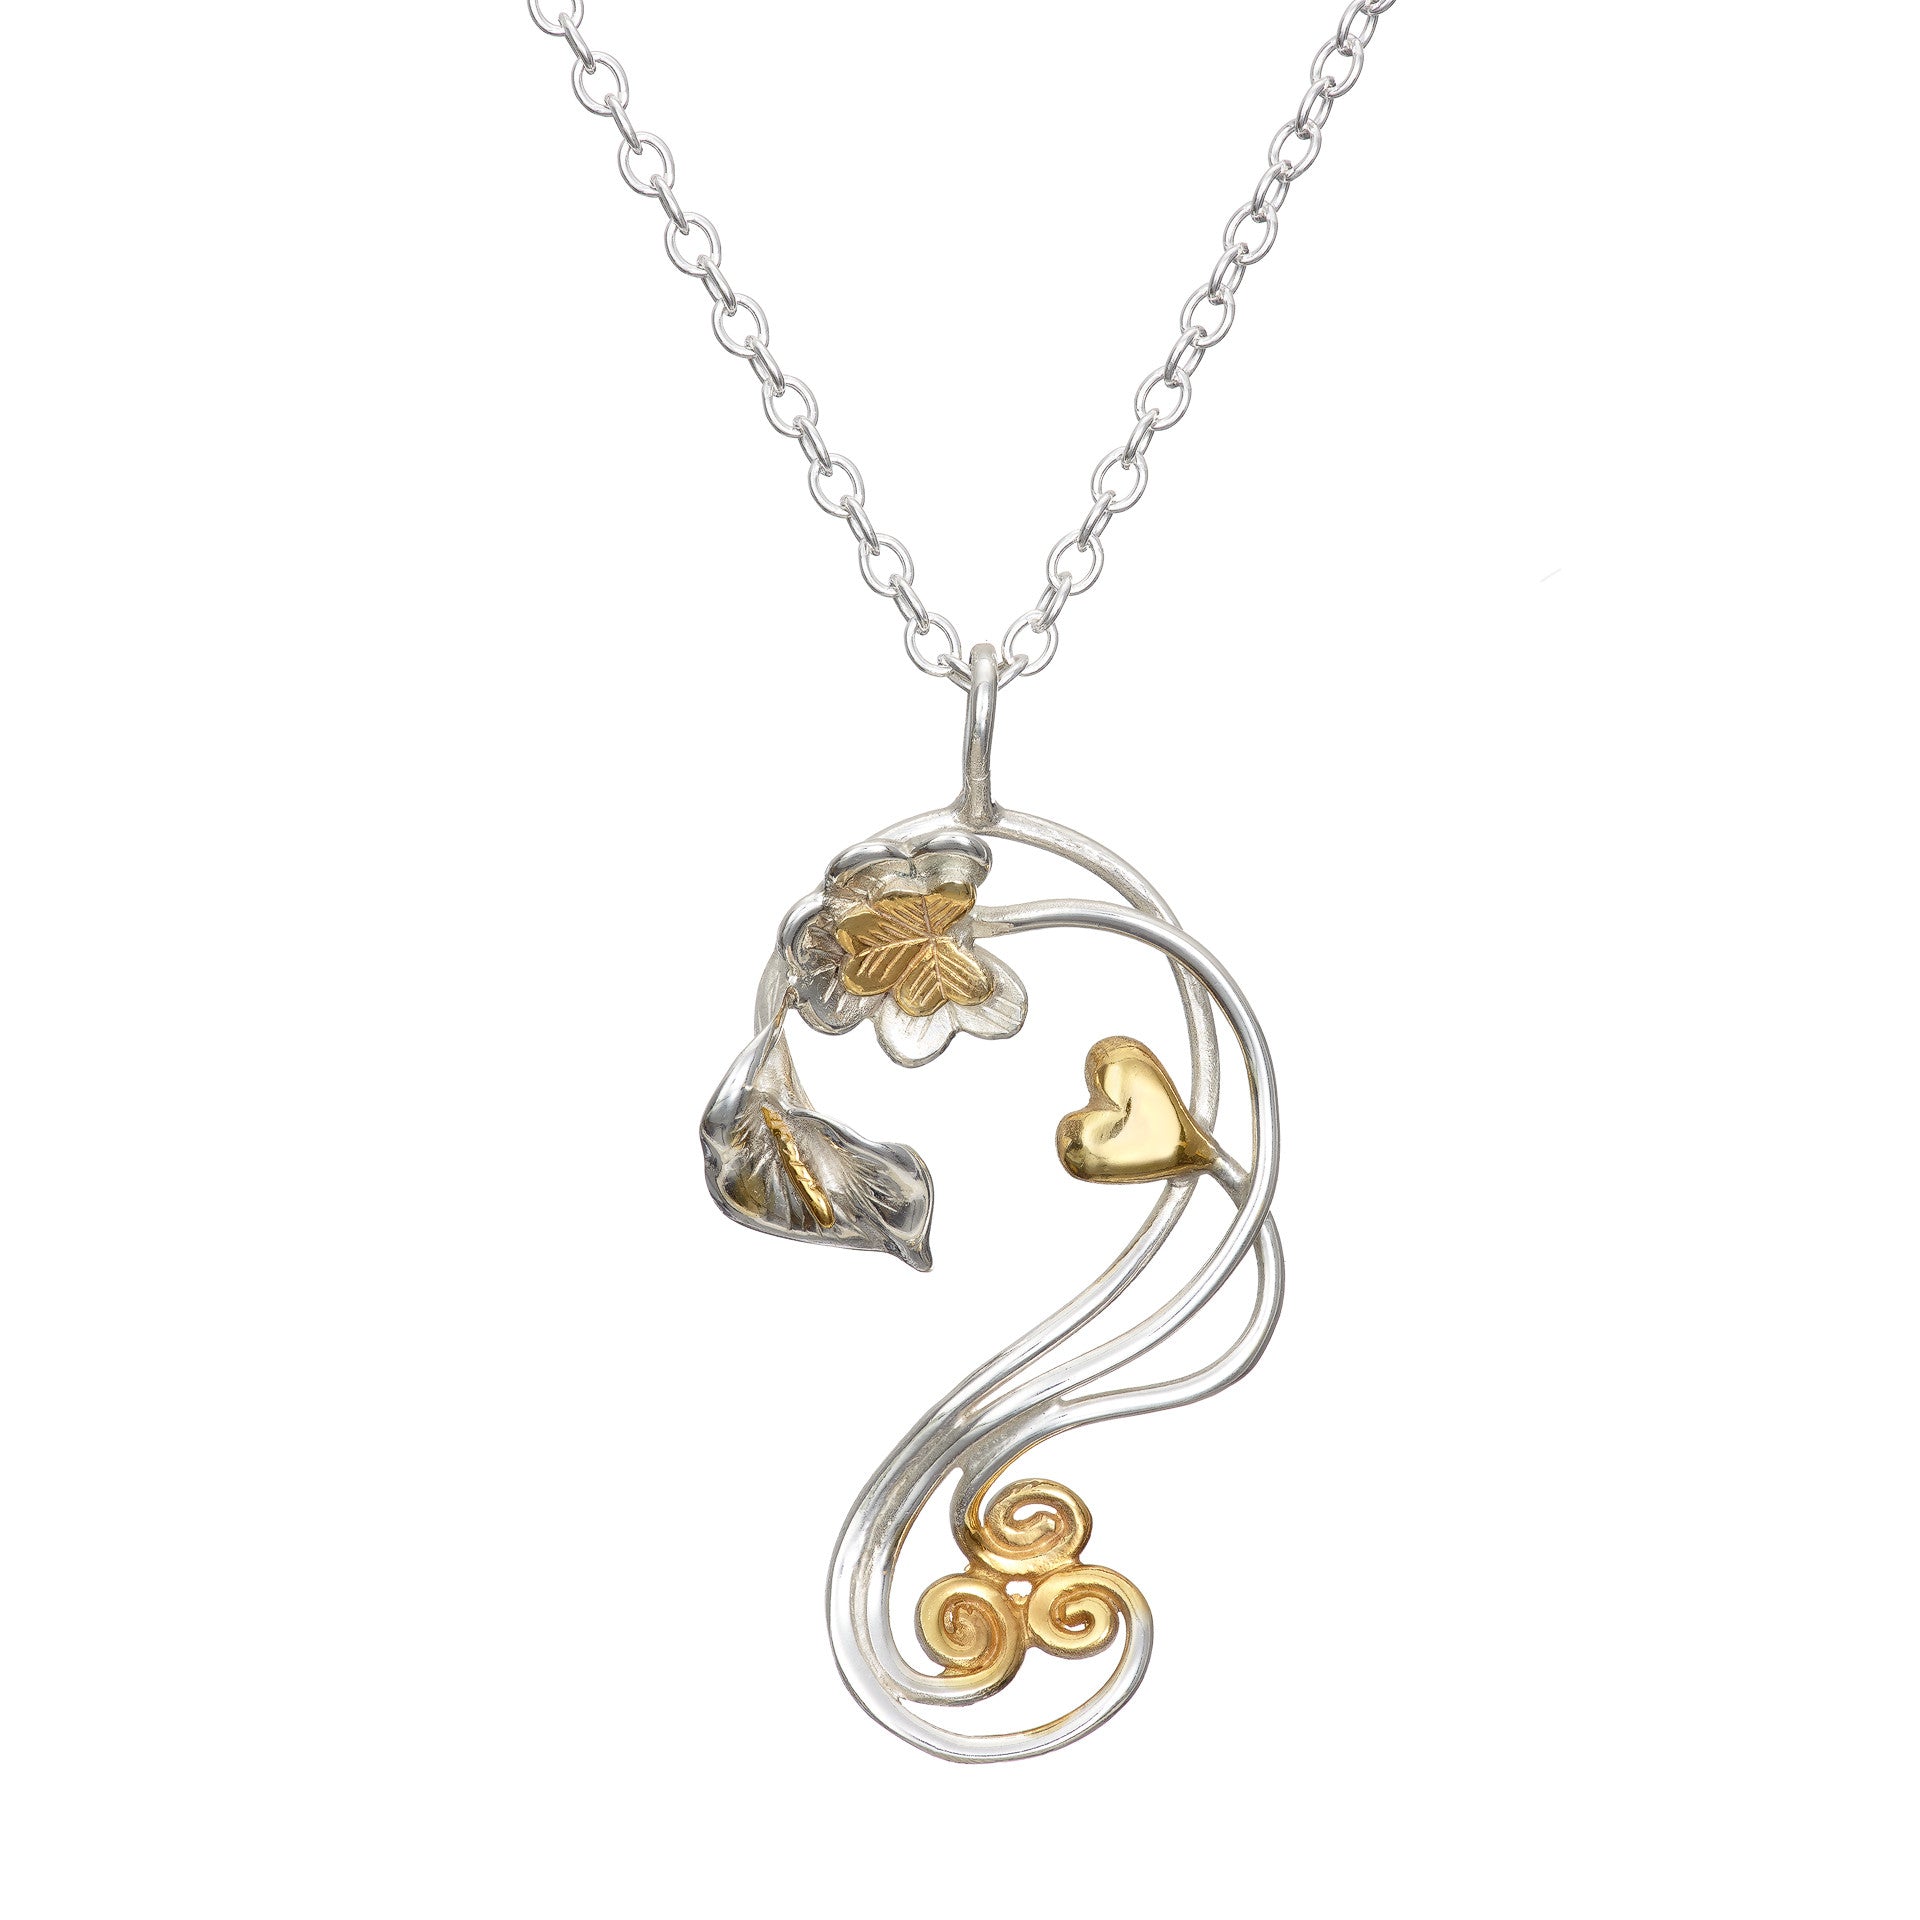 Éireann 1916 Pendant handcrafted from Sterling Silver with 14ct Gold Irish Symbols.